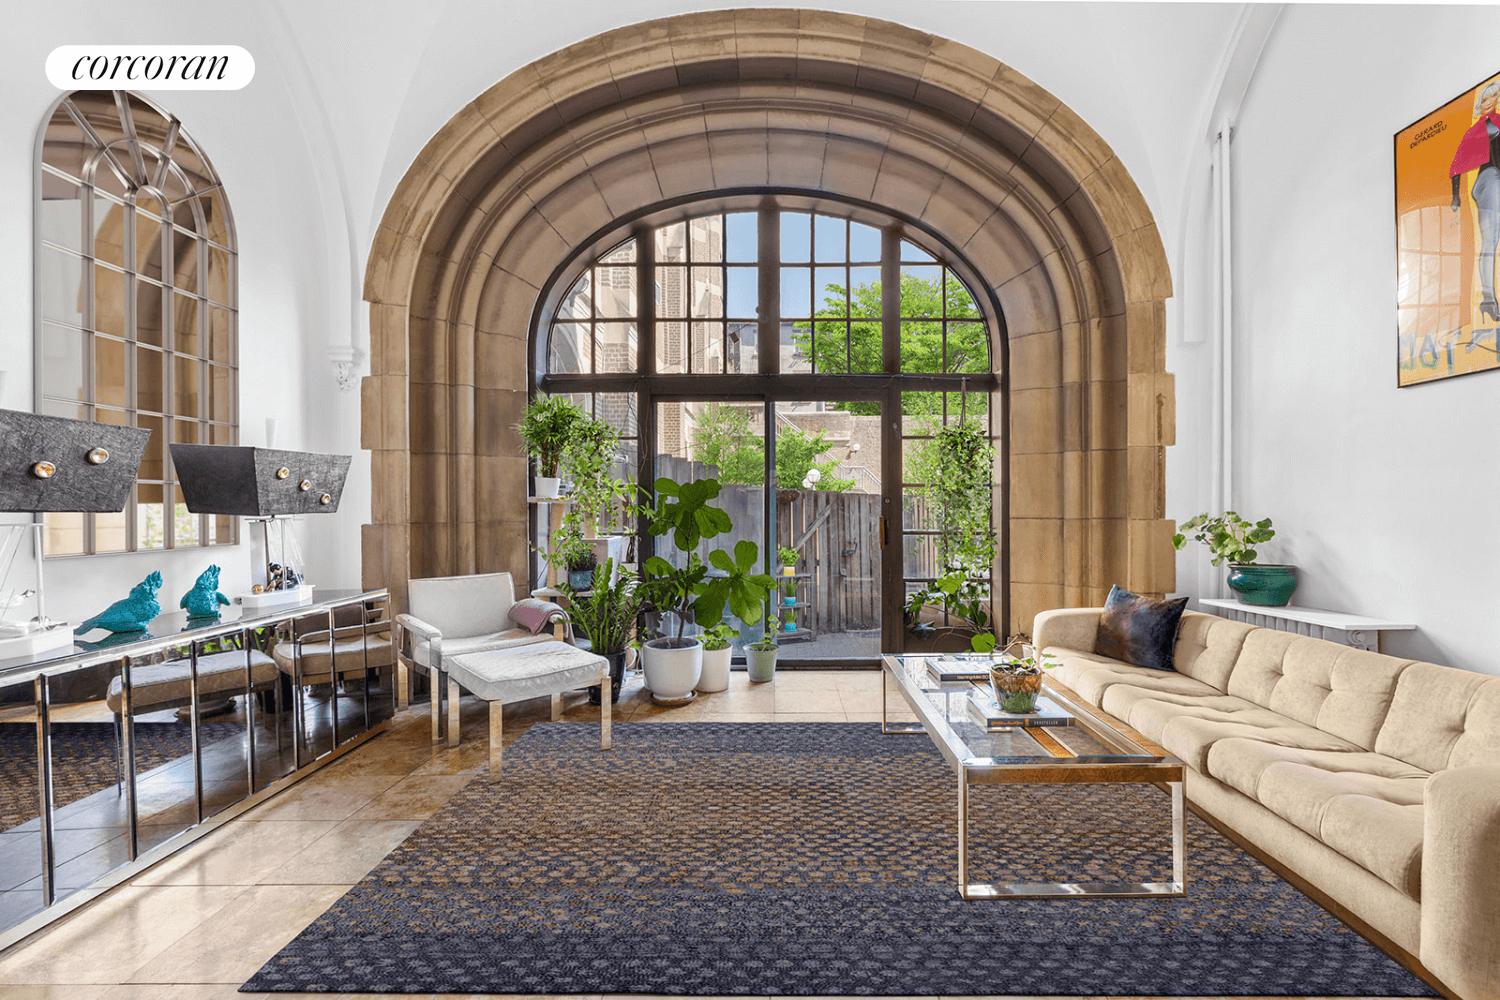 clinton hill condo - living room with massive stone arch out to patio